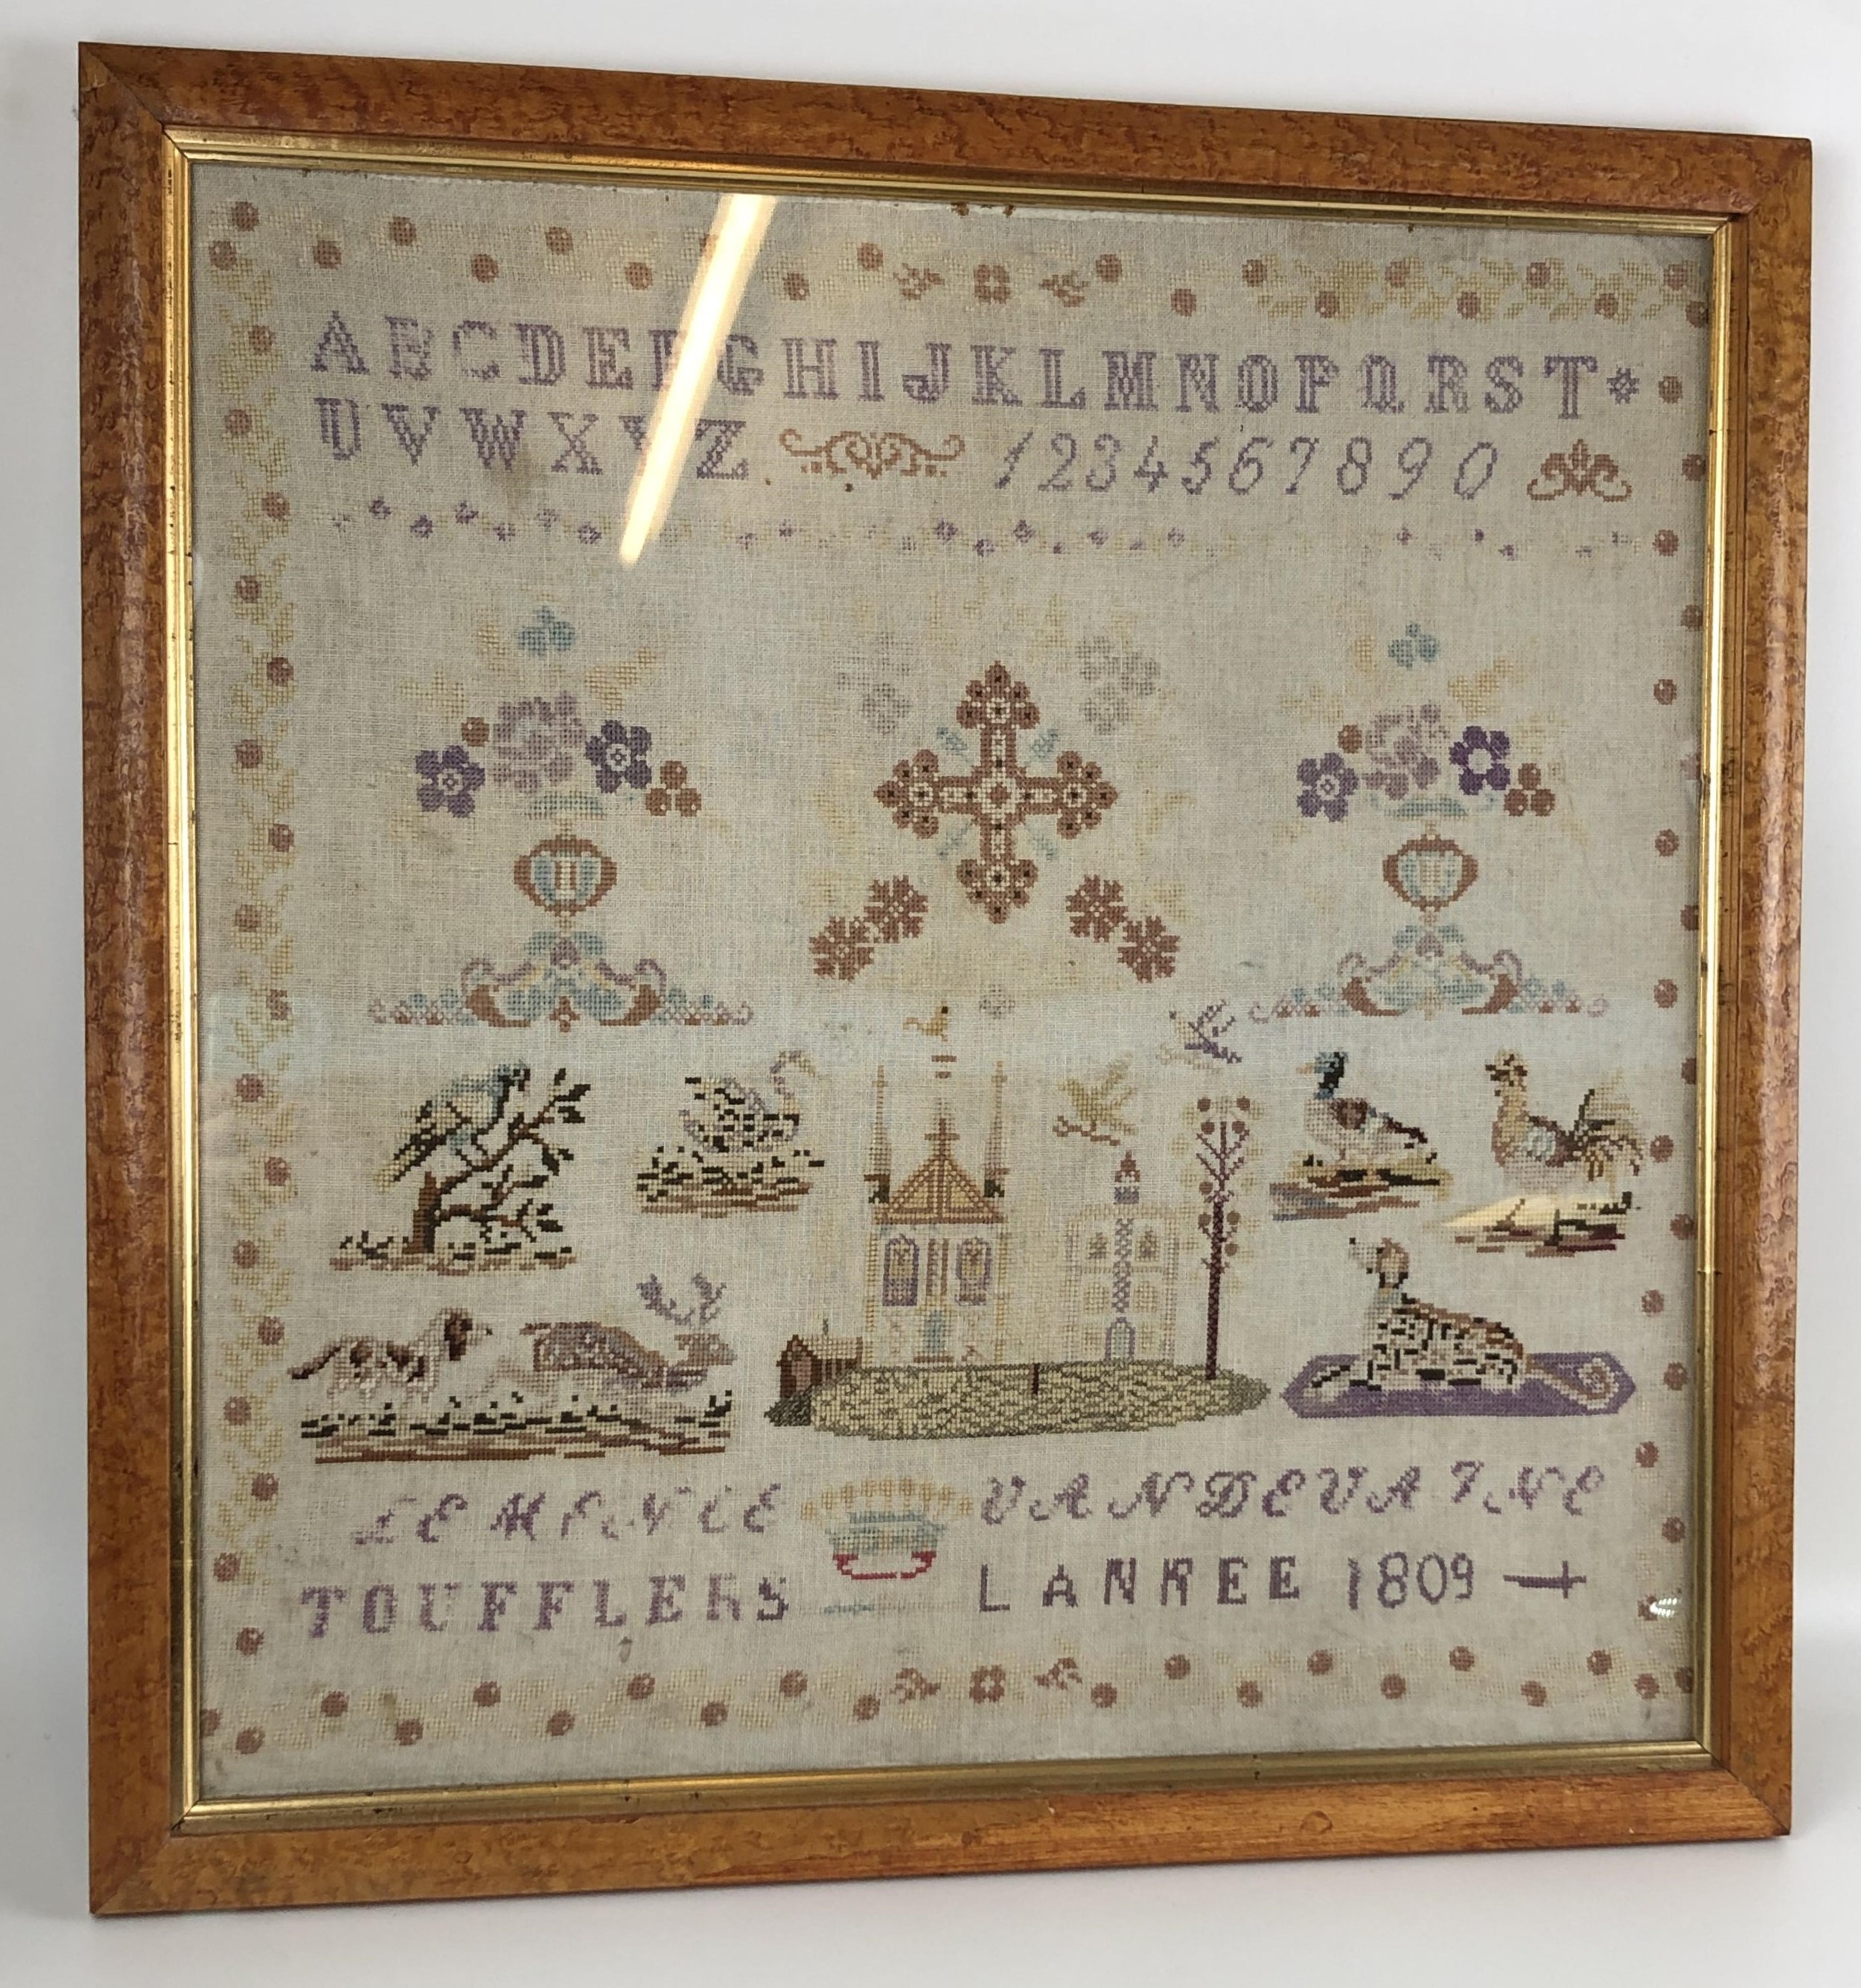 A 19th century sampler, signed Toufflers Lanree, dated 1809, 51 x 50 cm